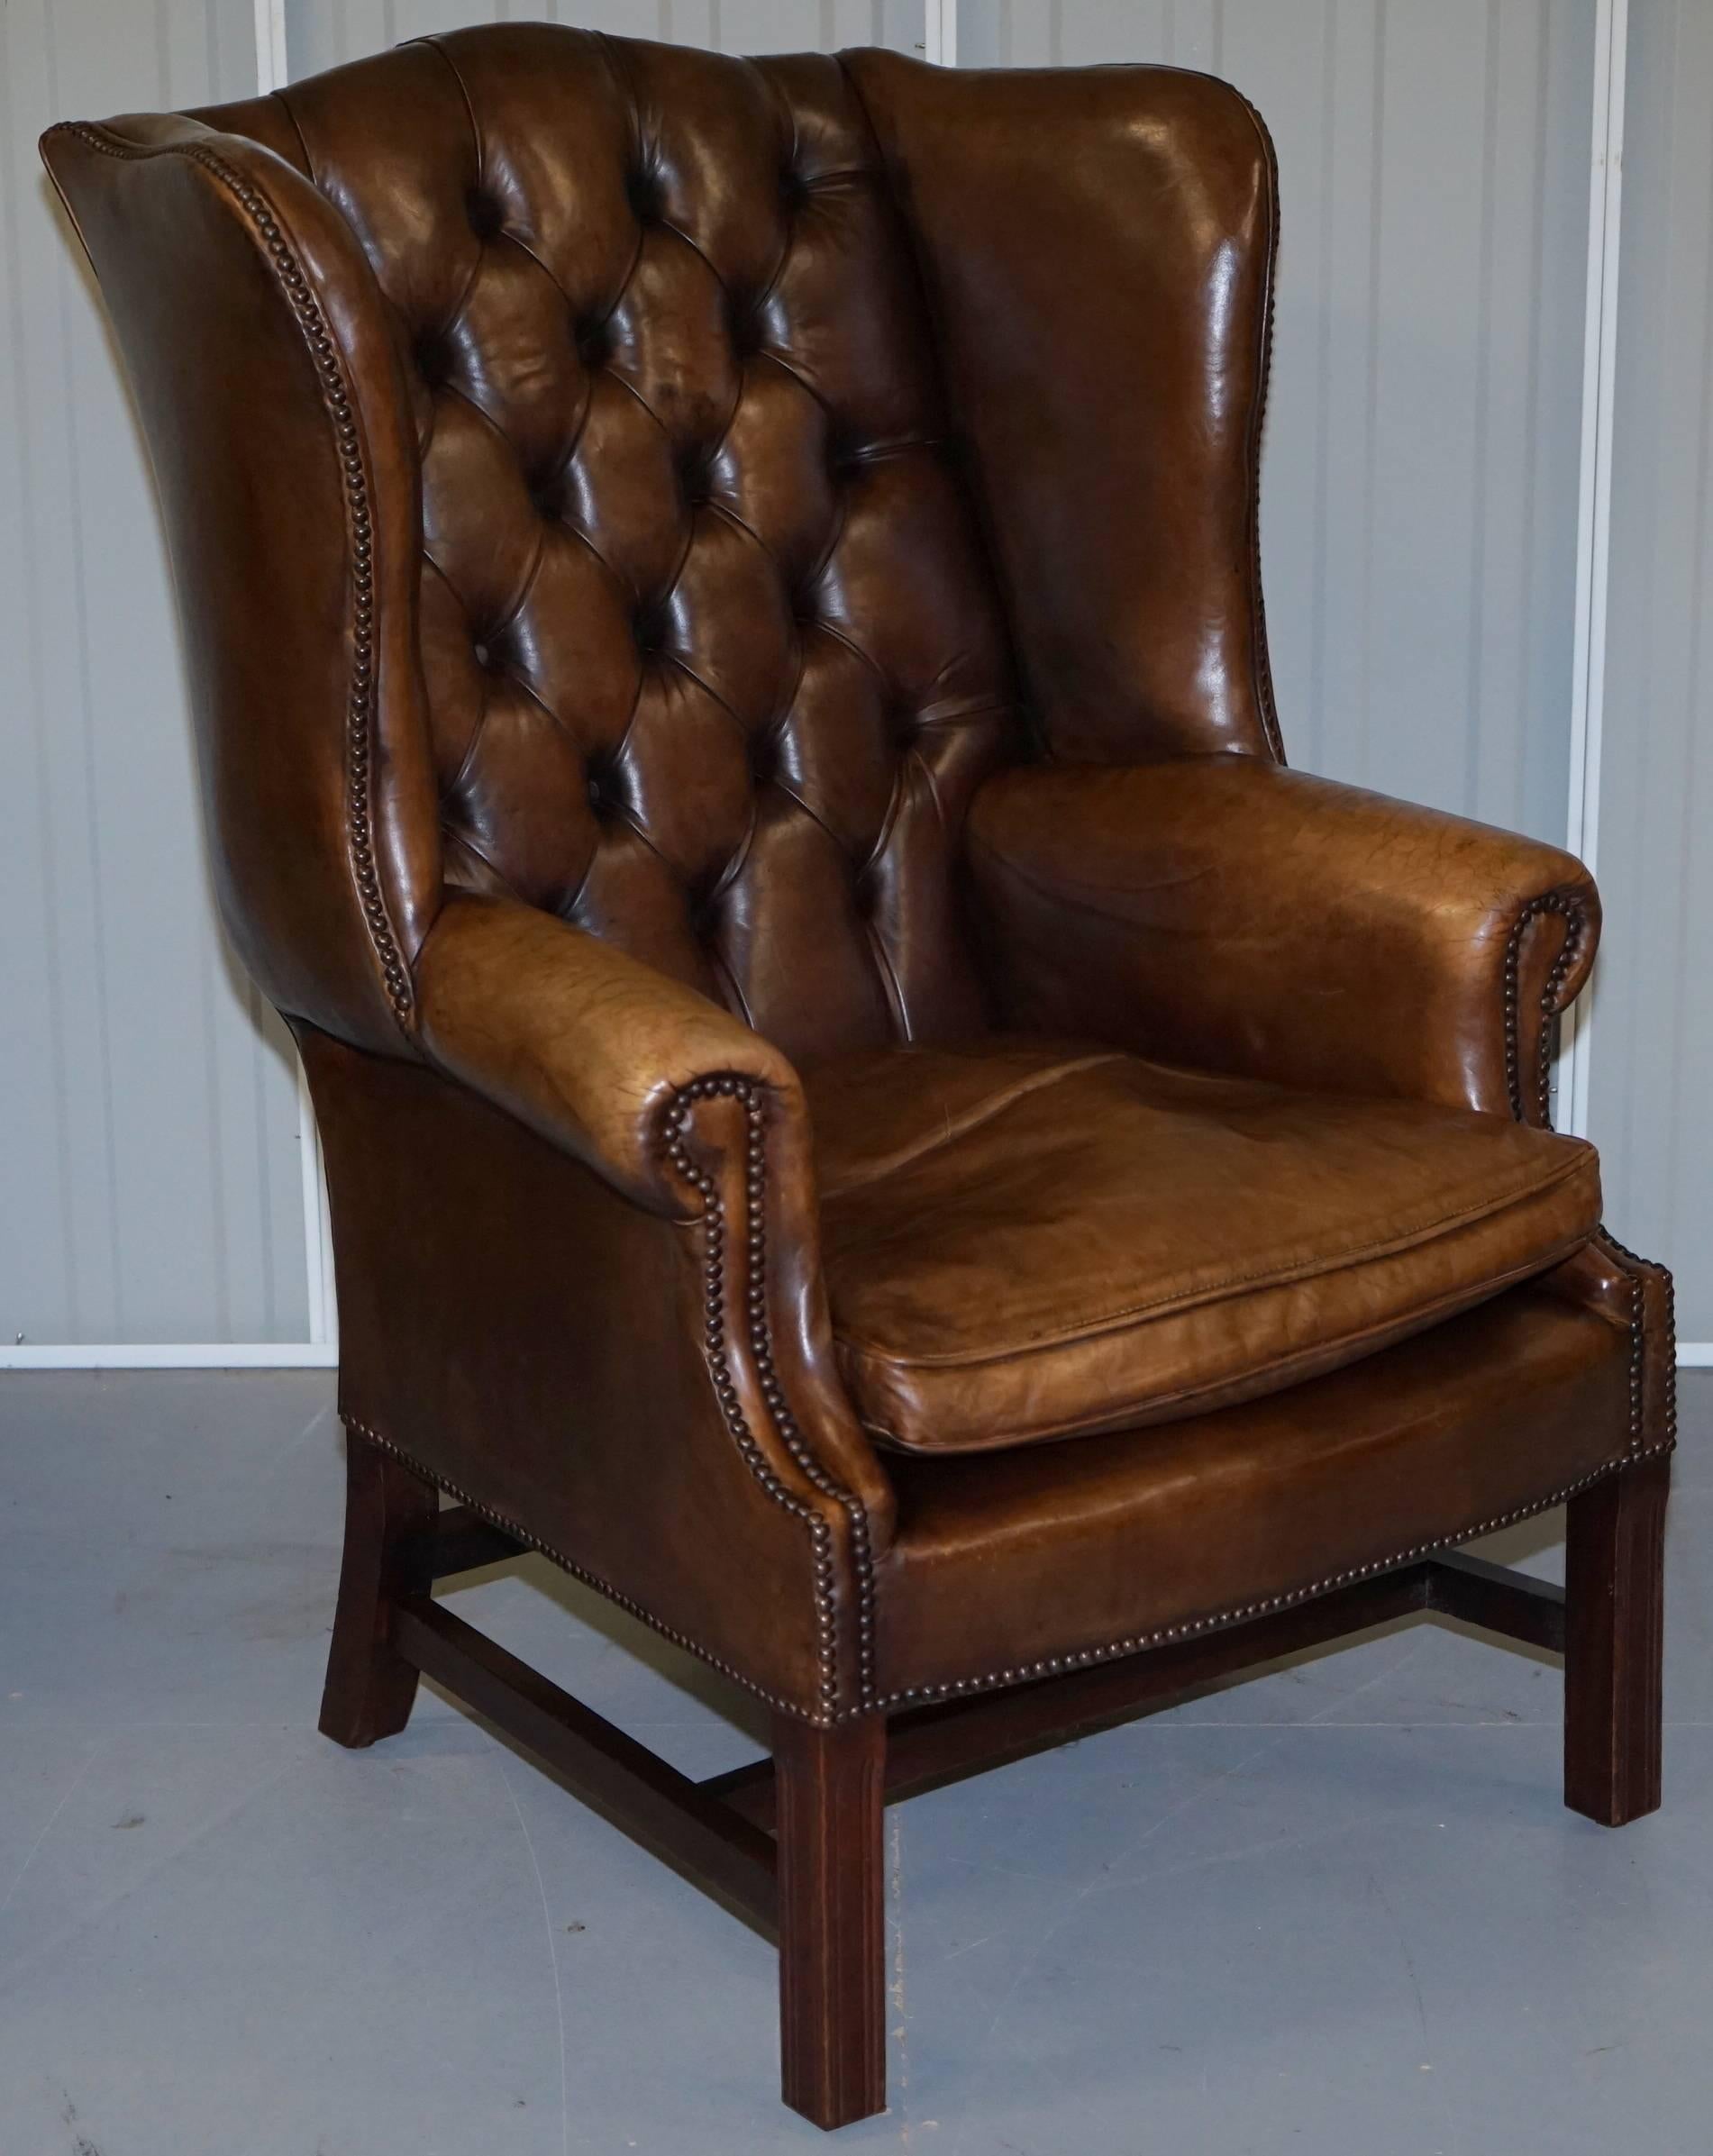 We are delighted to offer for sale this stunning pair of hand dyed aged vintage brown leather Chesterfield Georgian style wingback armchairs

If you know good quality work then you will recognize that these are pure class and quality pieces that